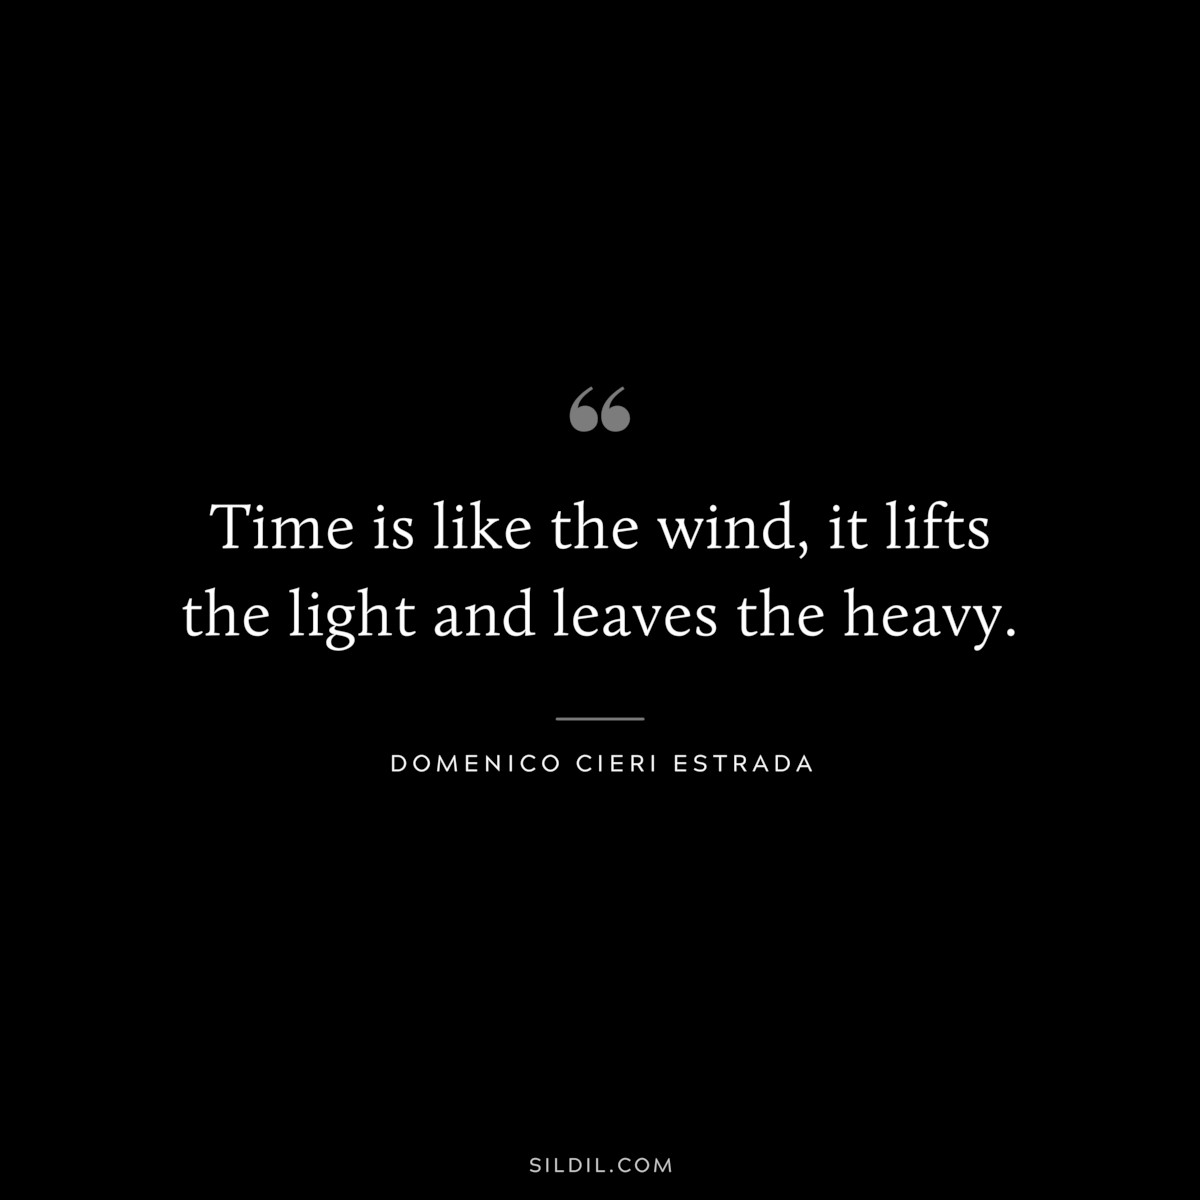 Time is like the wind, it lifts the light and leaves the heavy. ― Domenico Cieri Estrada